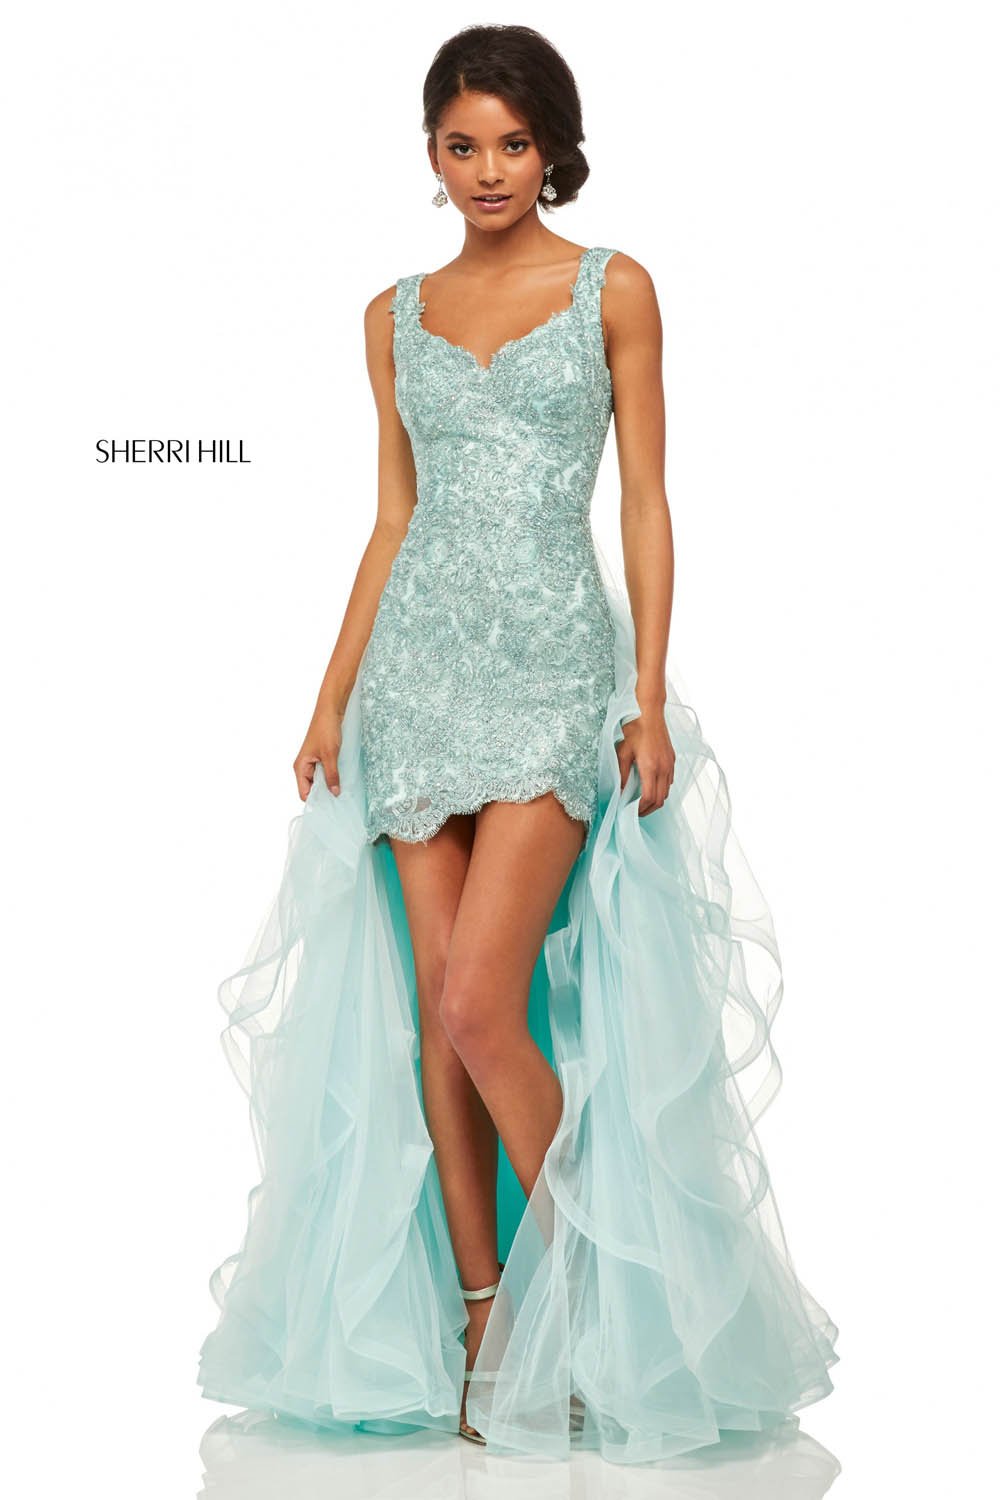 Sherri Hill 52562 dress images in these colors: Ivory Gold, Rose Gold, Wine, Black, Light Blue, Lilac, Aqua, Navy.